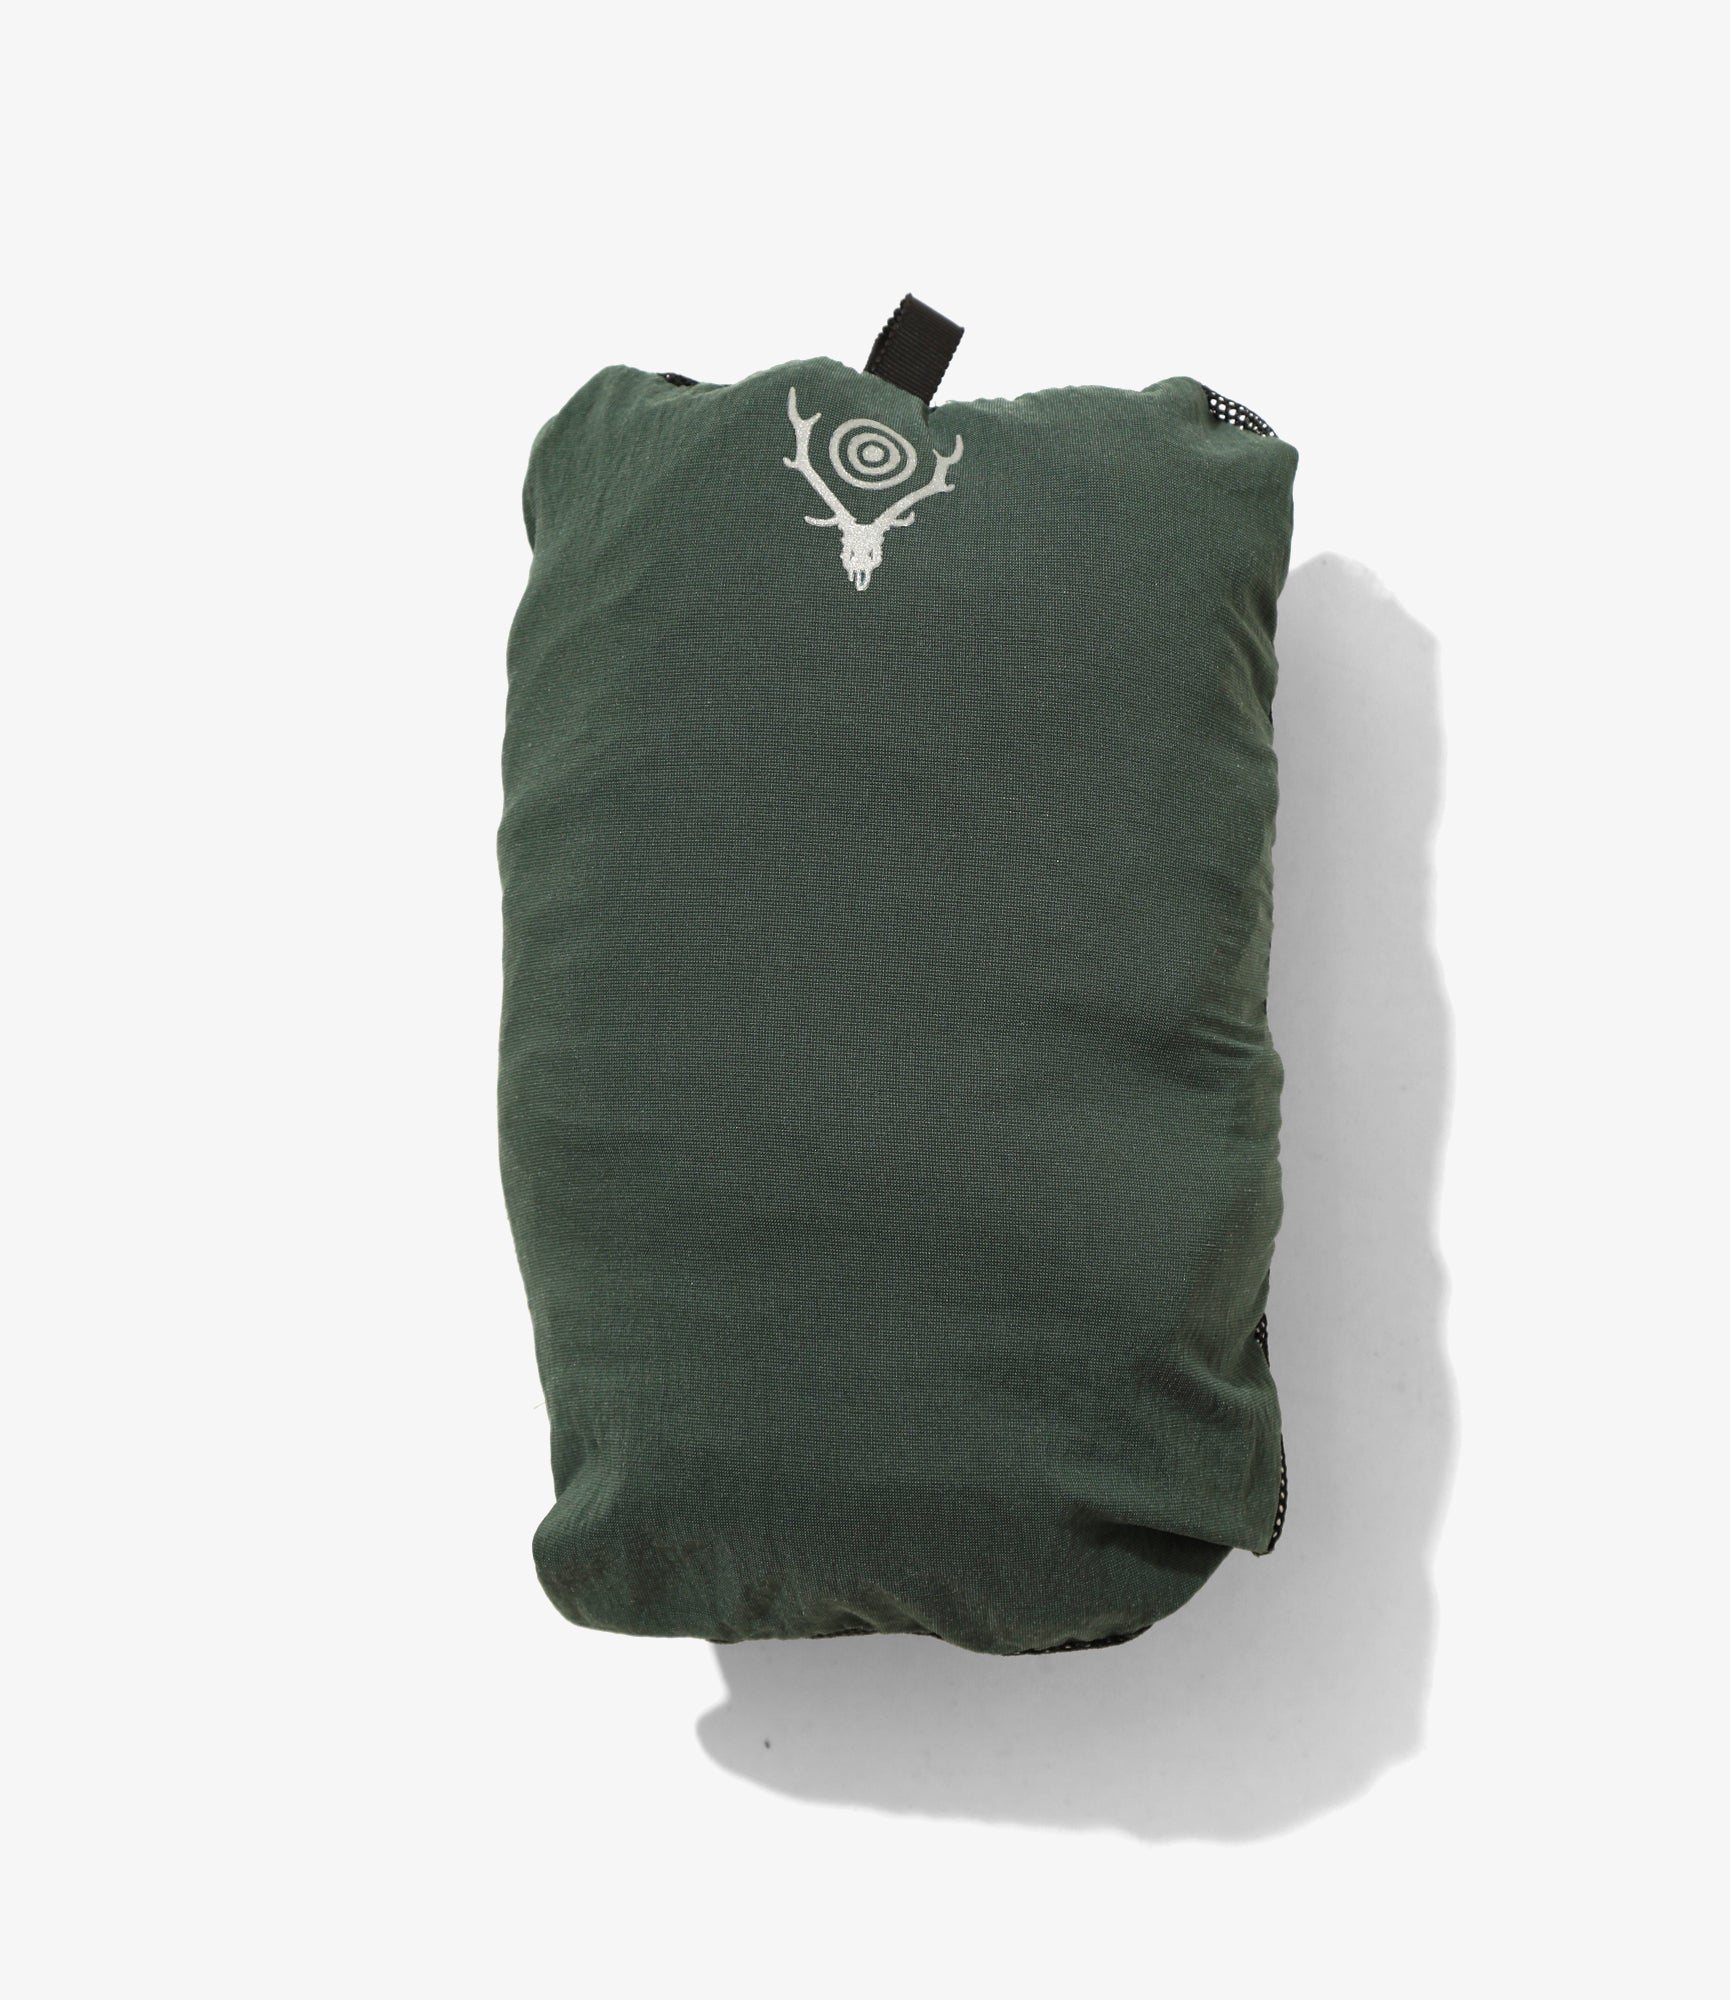 South2 West8 Packable Vest - Nylon Typewriter - Green